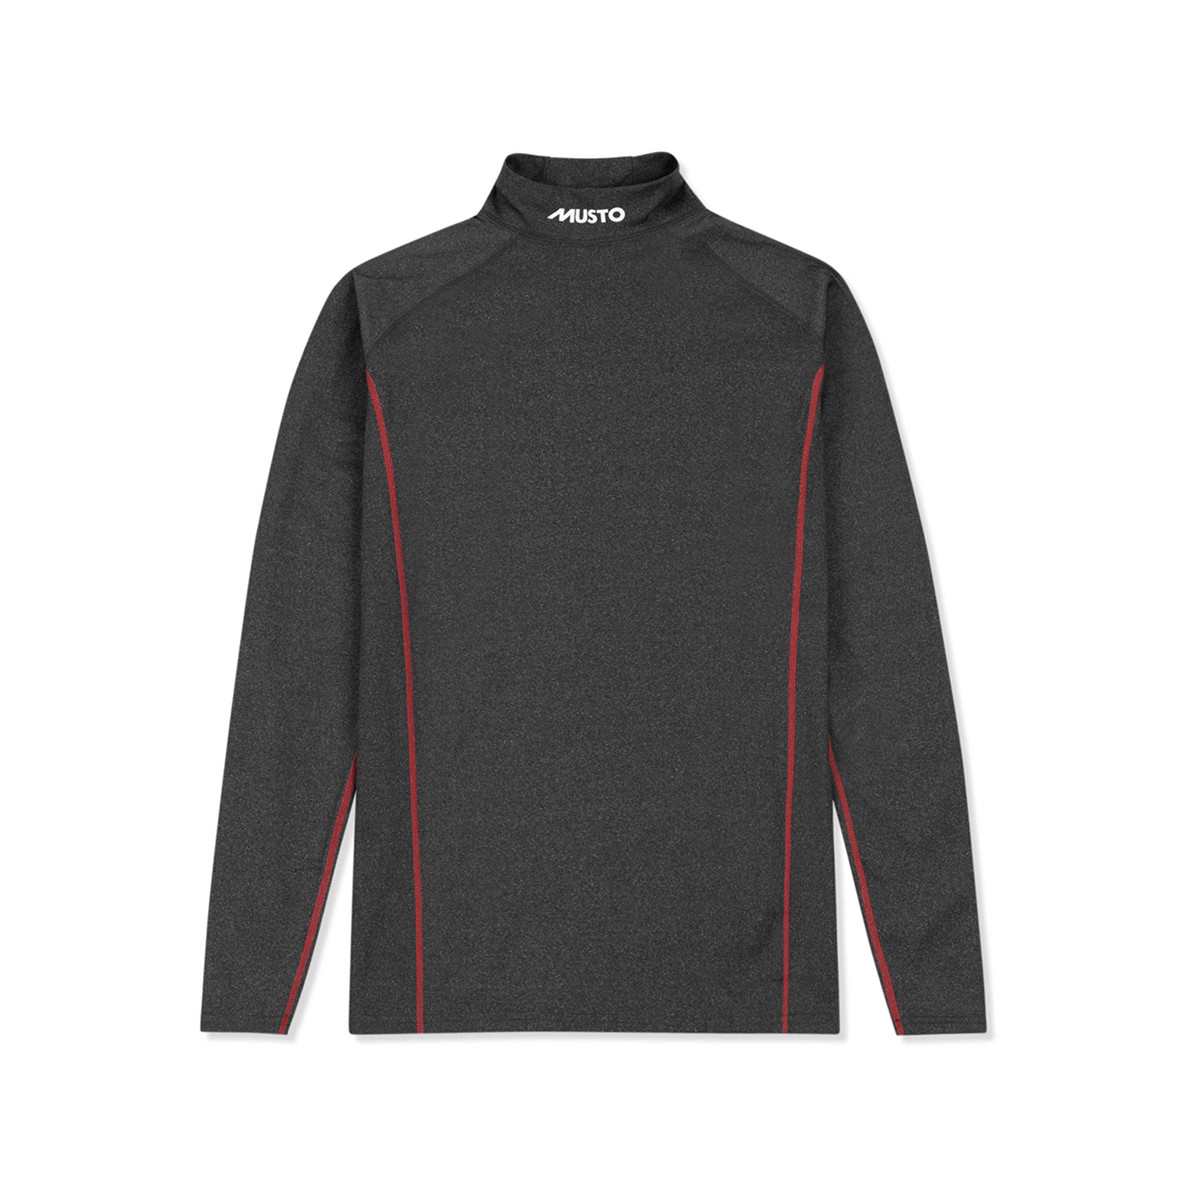 Musto Thermo Base-Layer Longsleeve heren donkergrijs, maat S